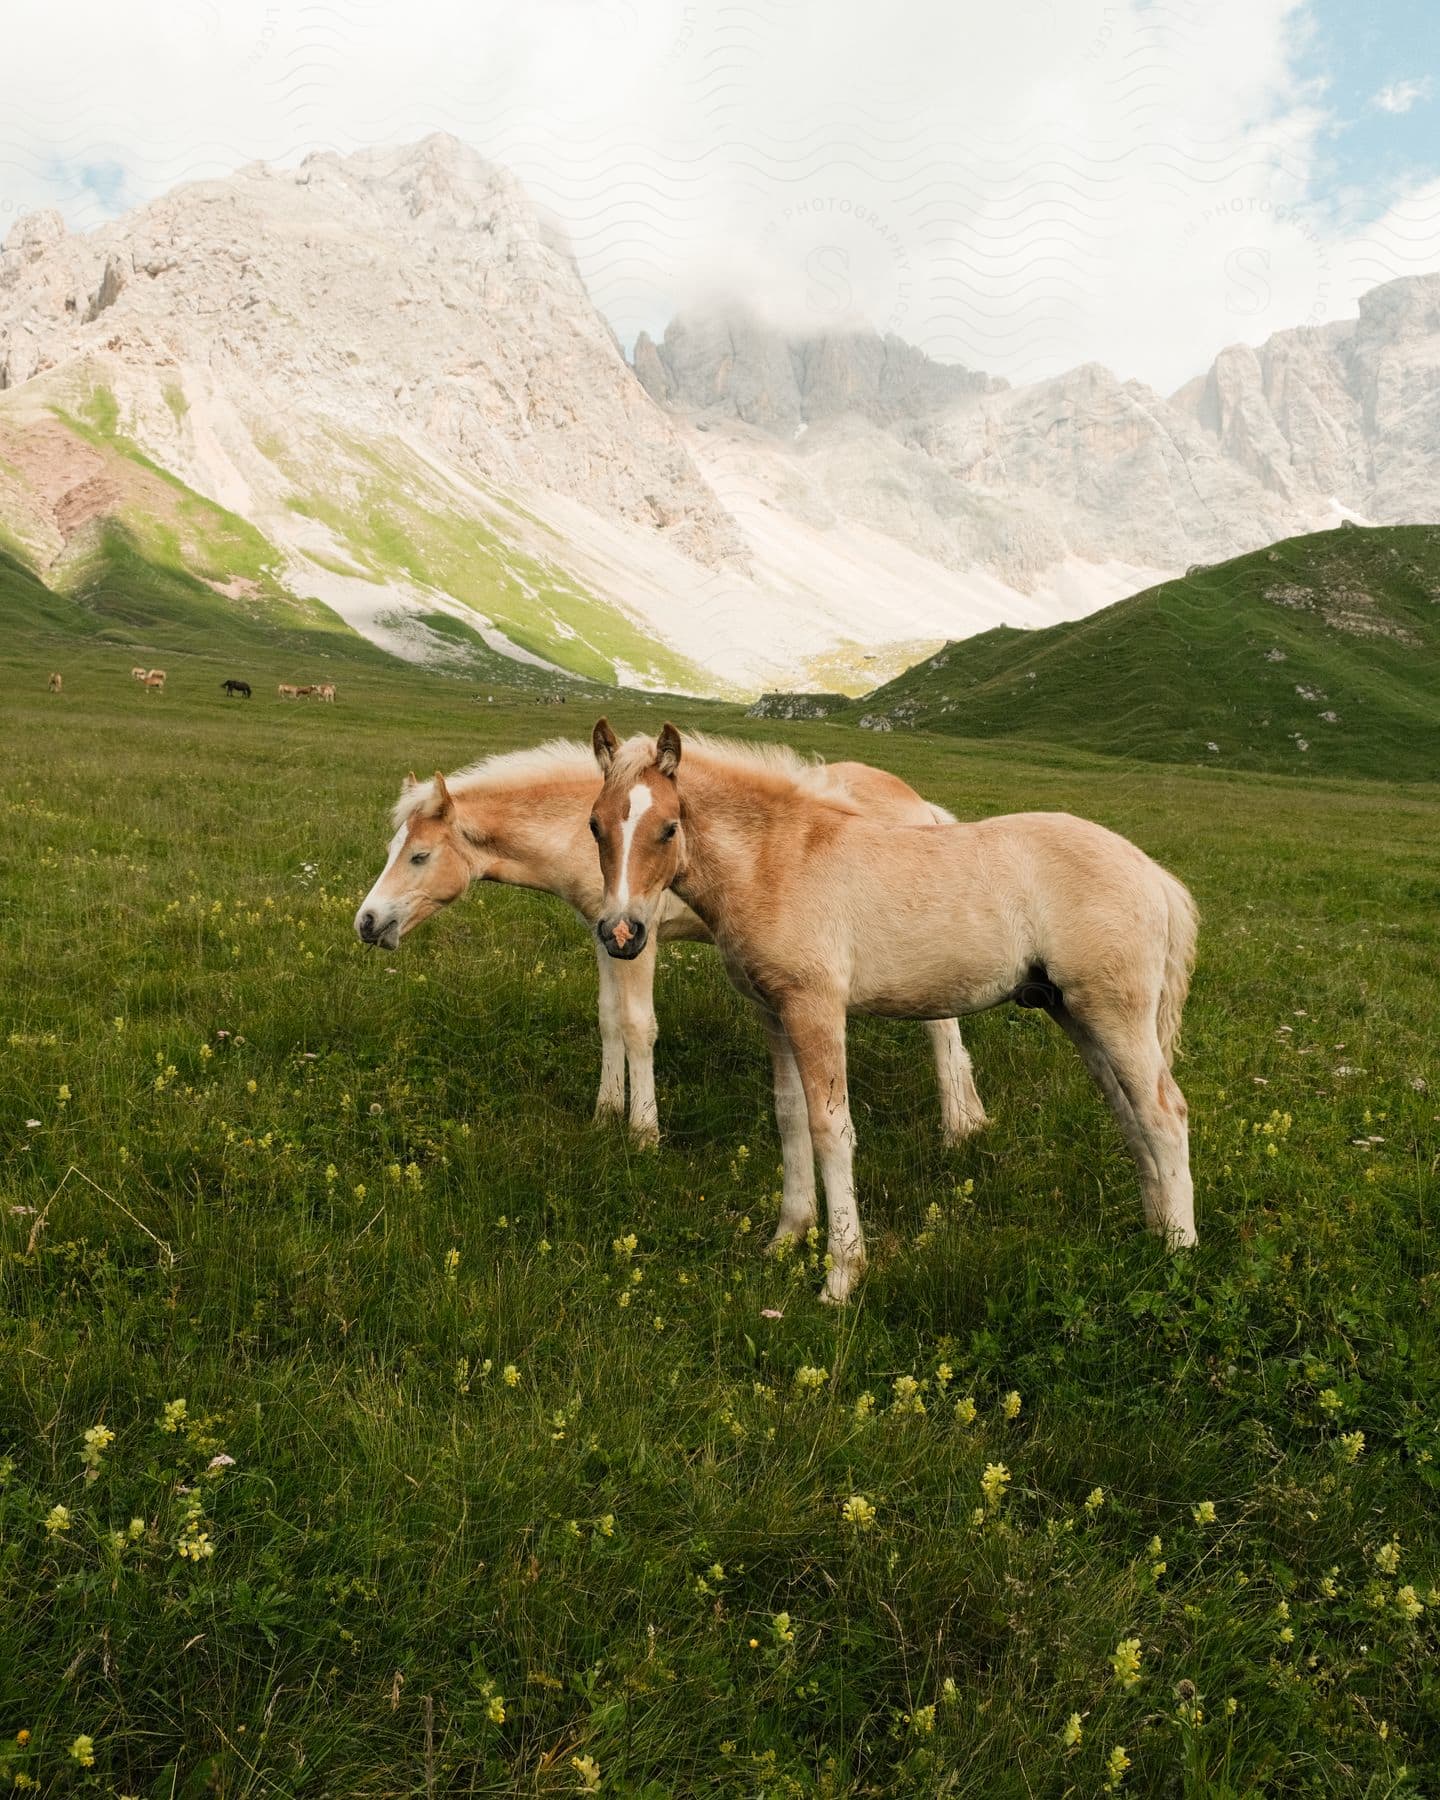 Tan horsed grazing on lush green grass with mountains behind